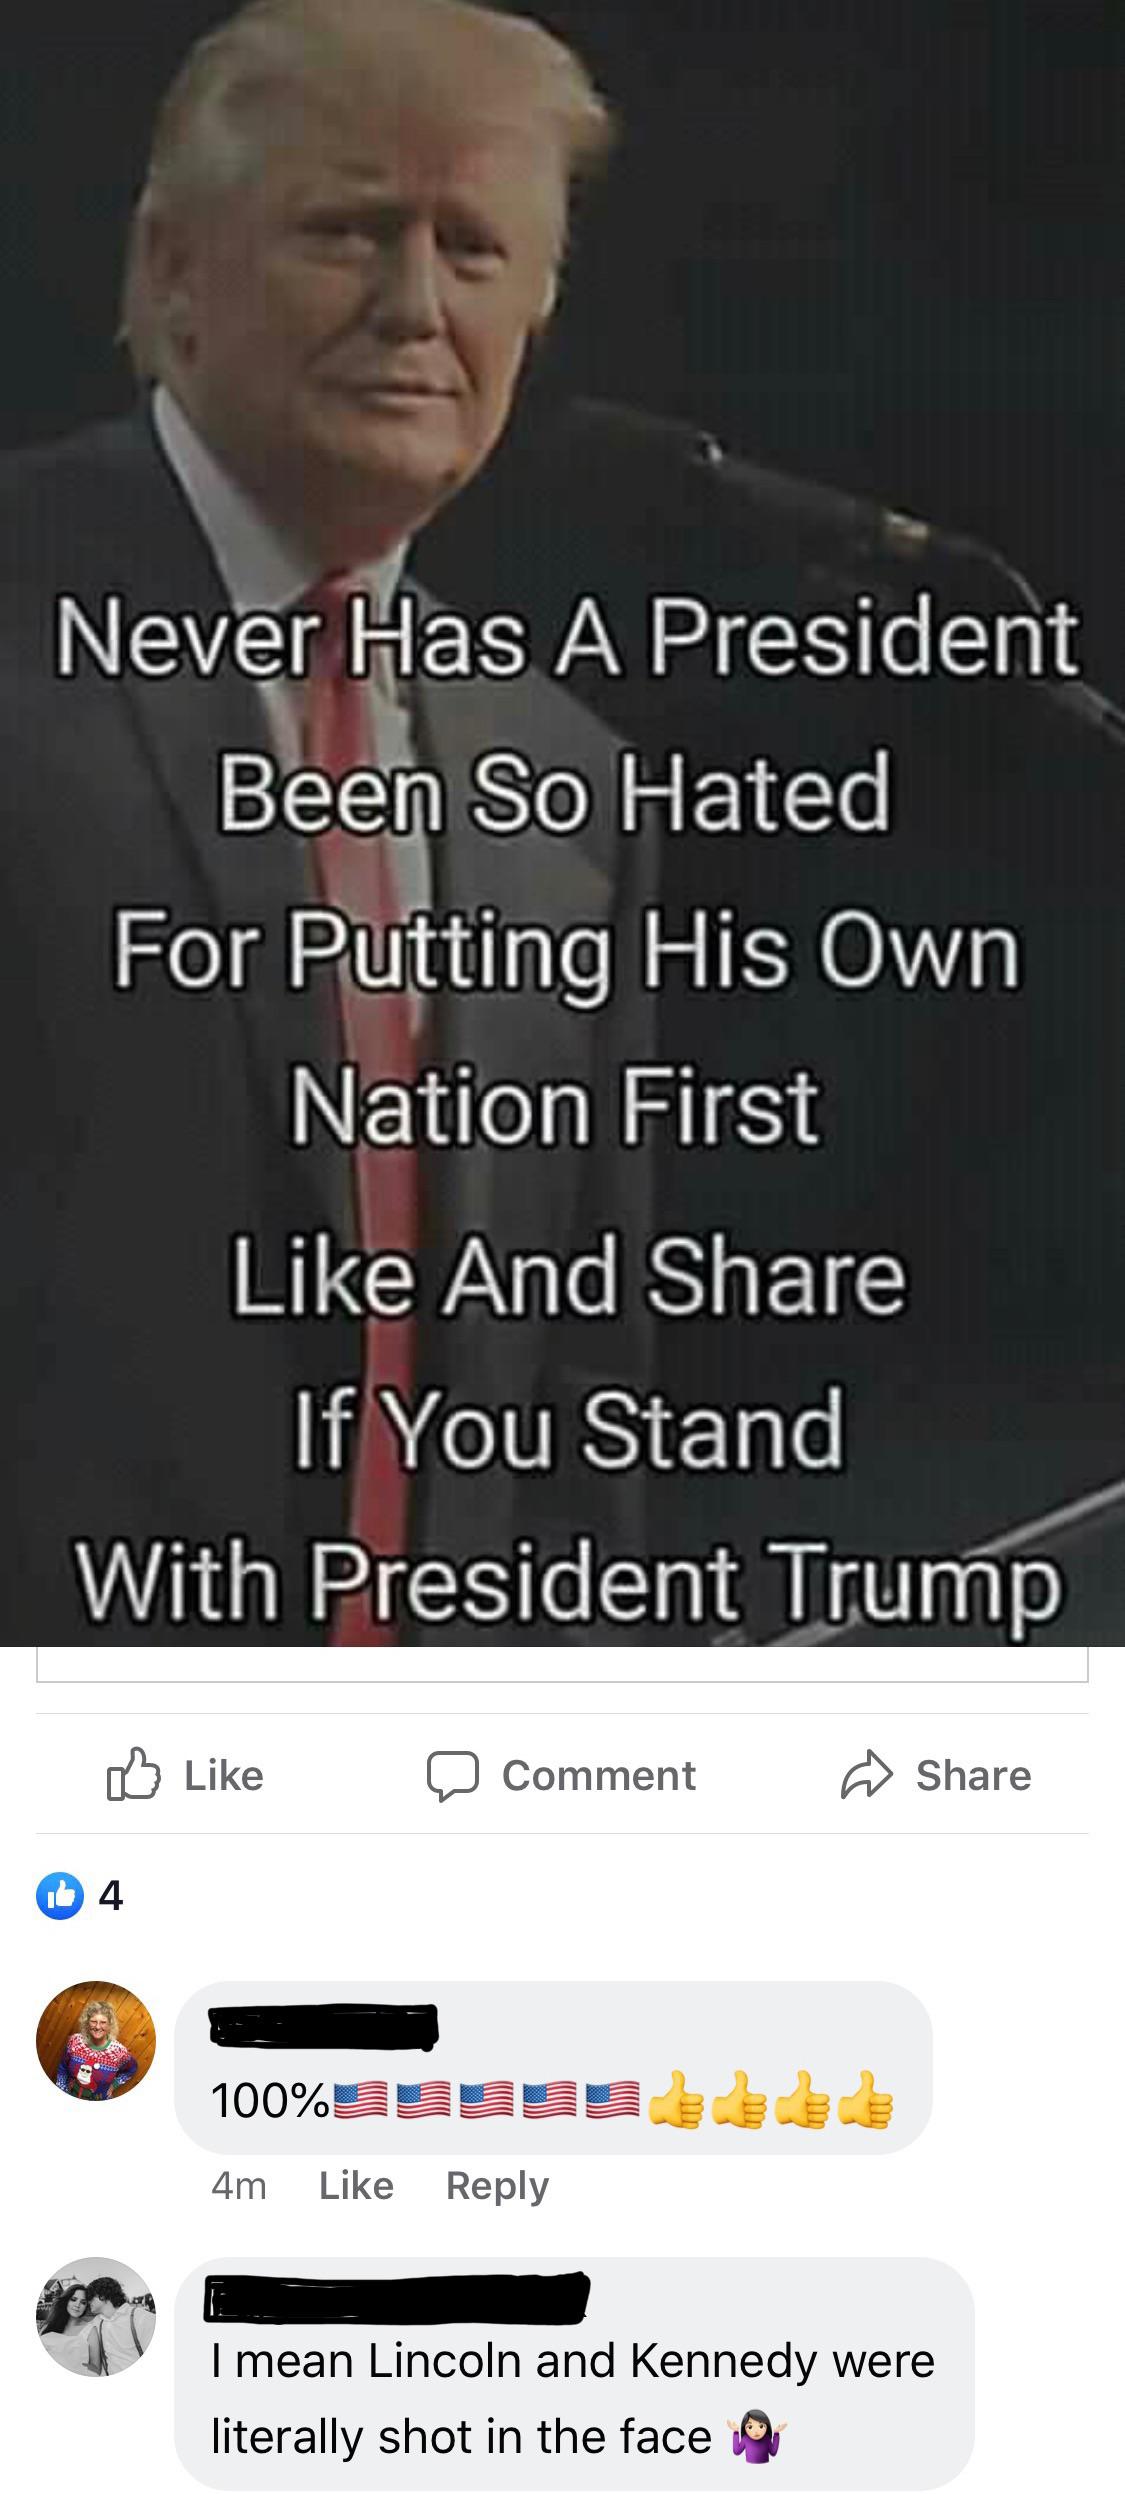 photo caption - Never Has A President Been So Hated For Putting His Own Nation First And If You Stand With President Trump D Comment 100%9FFEE 4m I mean Lincoln and Kennedy were literally shot in the face